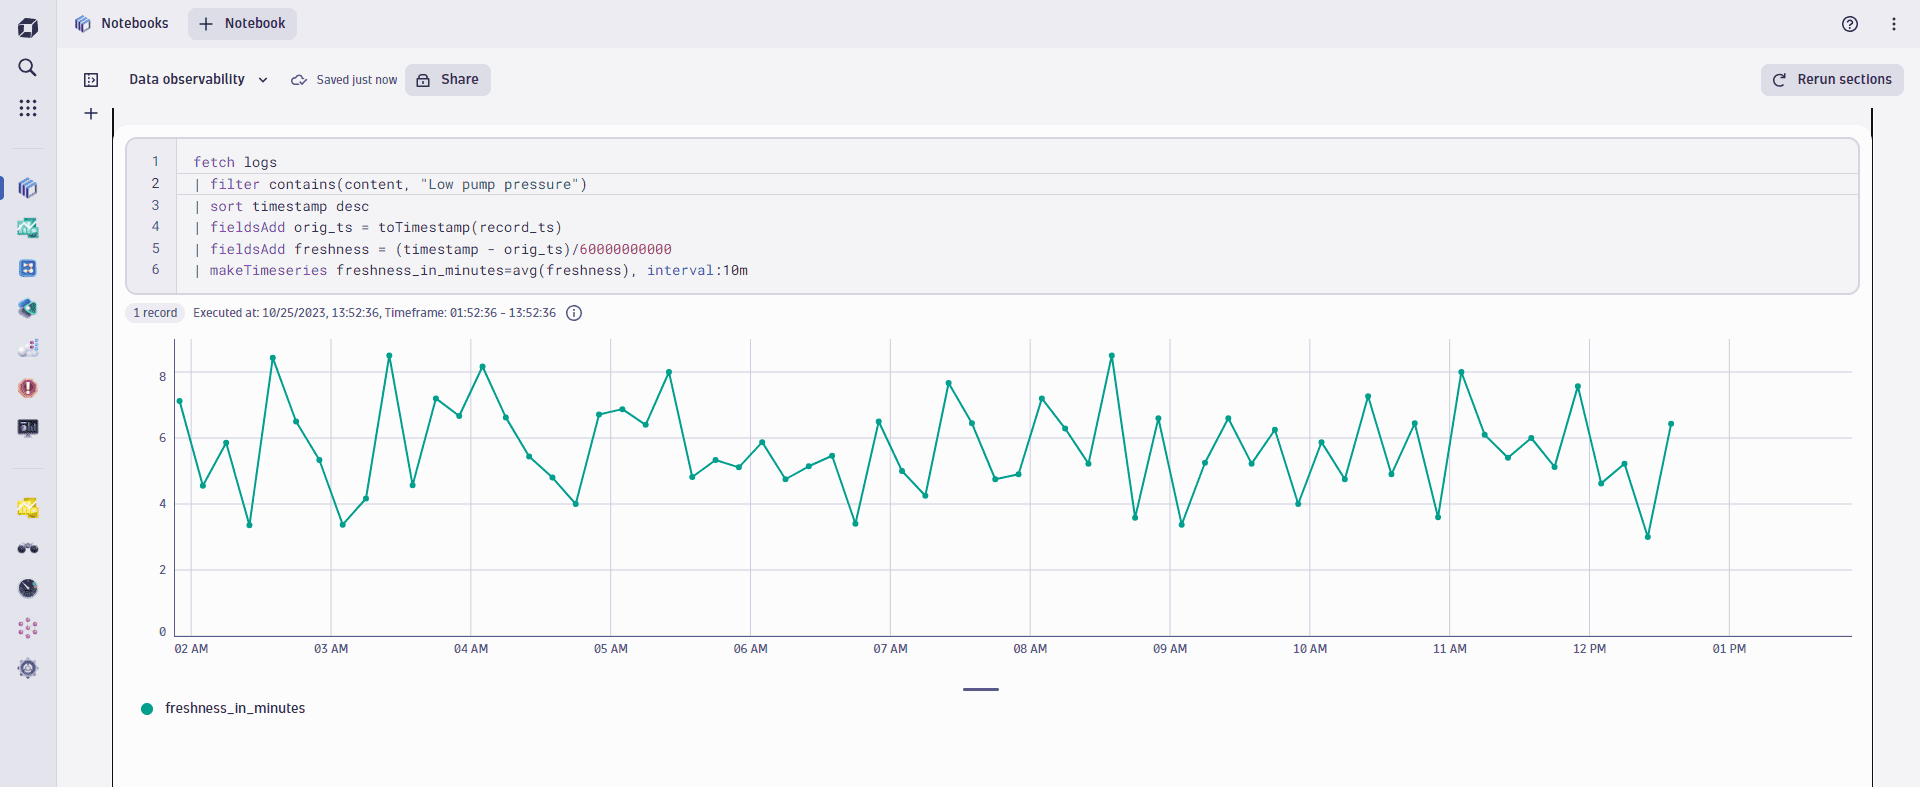 Chart data freshness in minutes over time